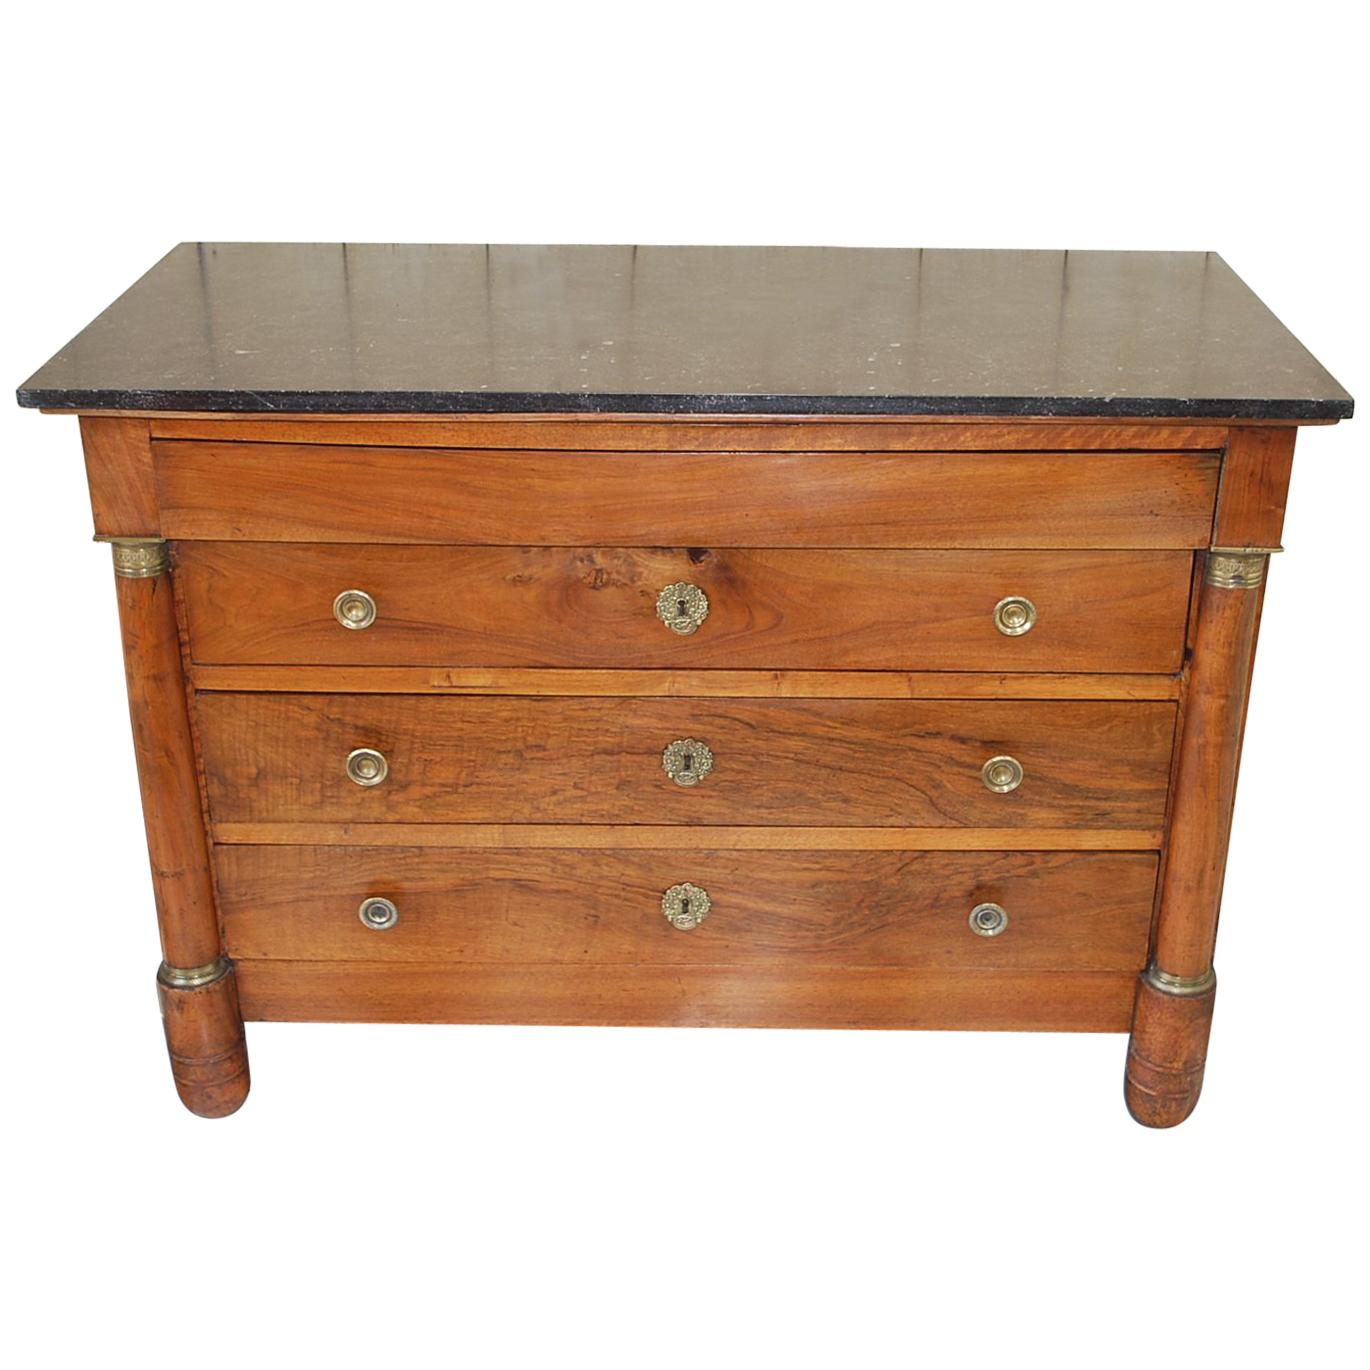 Antique French Empire period Walnut Commode /Chest of Drawers For Sale